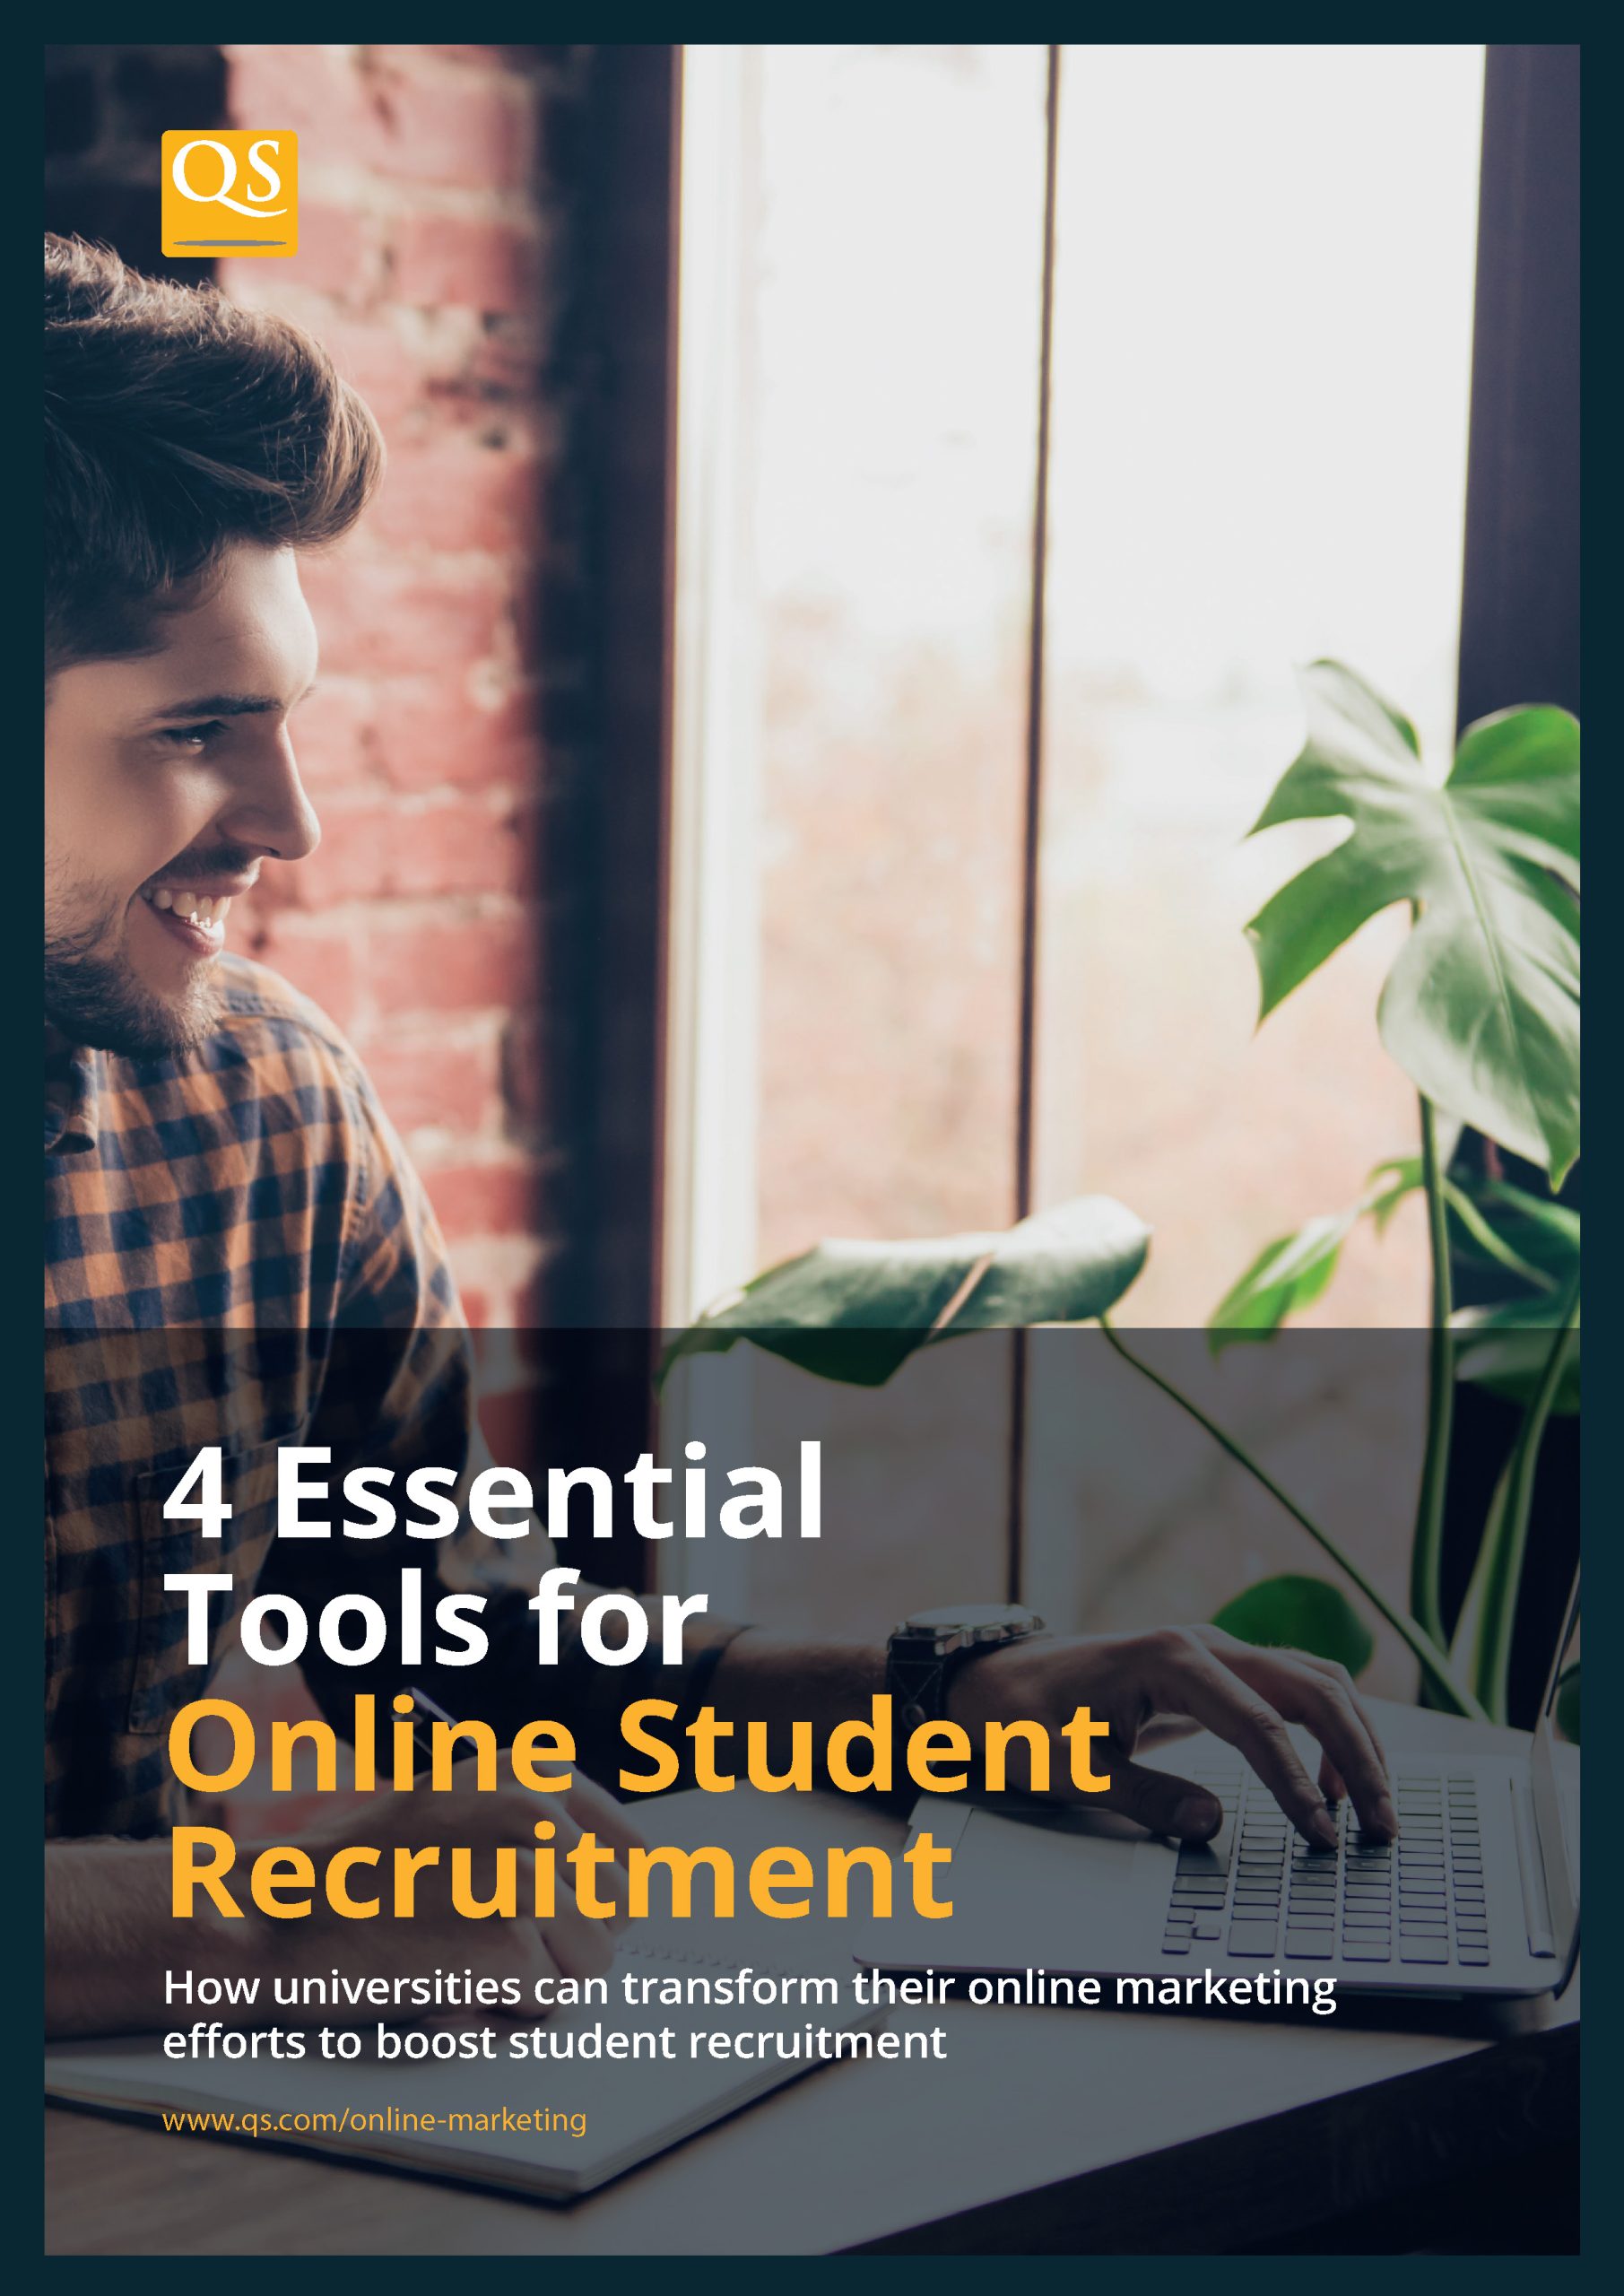 image cover for report '4 Essential Tools for Online Student Recruitment'